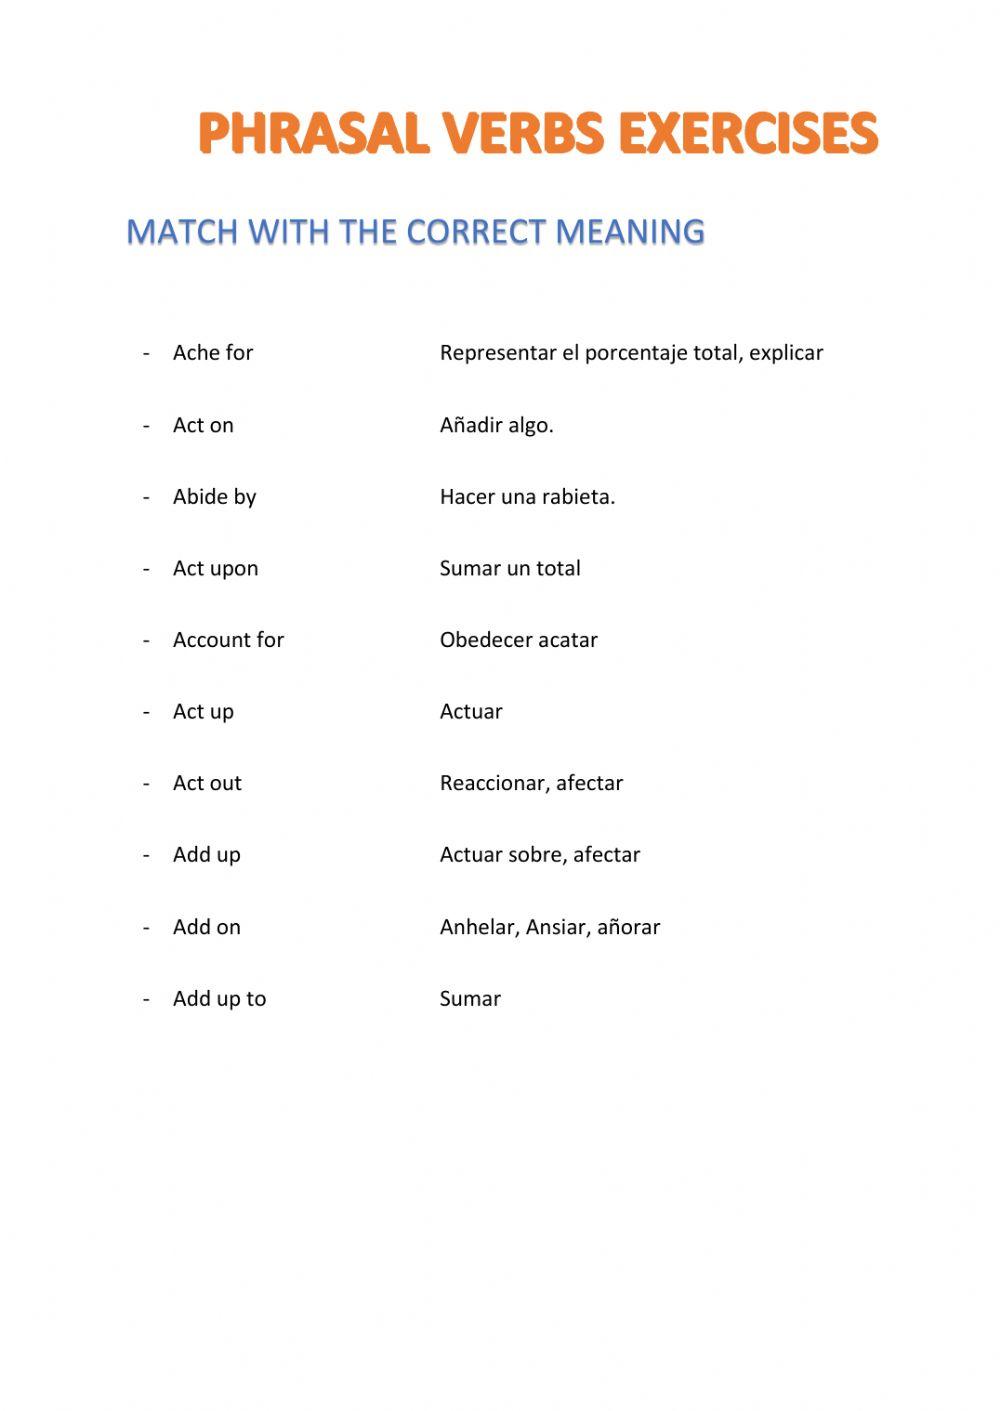 MATCH WITH THE MEANINGS